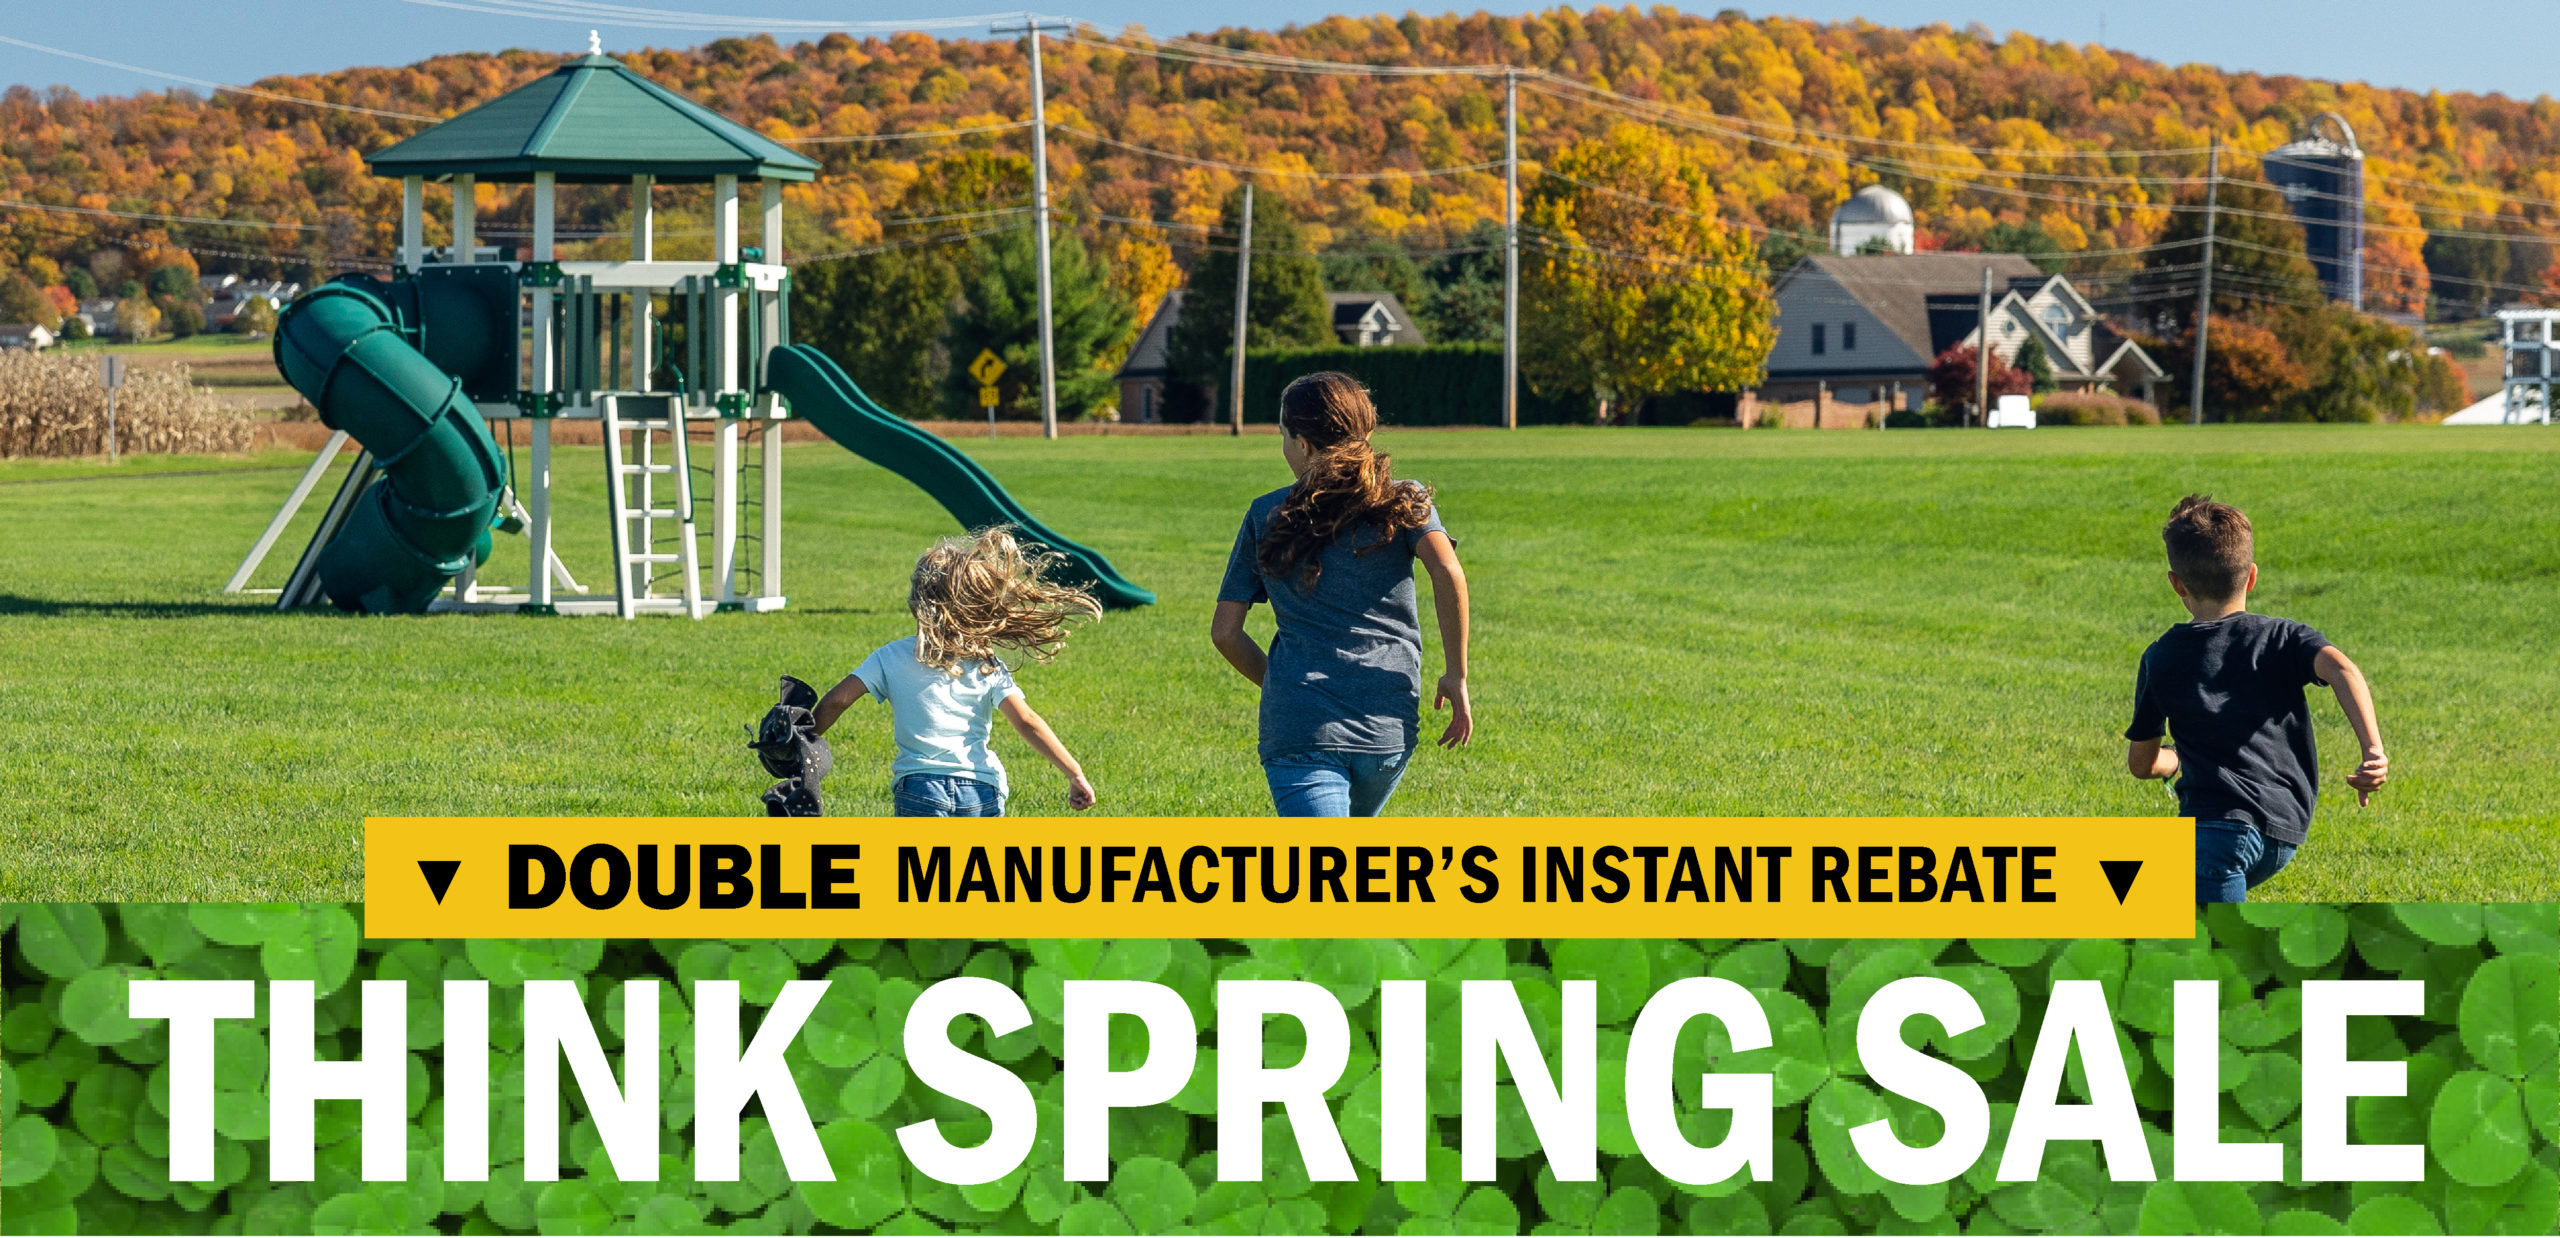 February Sale- Double Manufacturer's Instant Rebate, Think Spring Sale